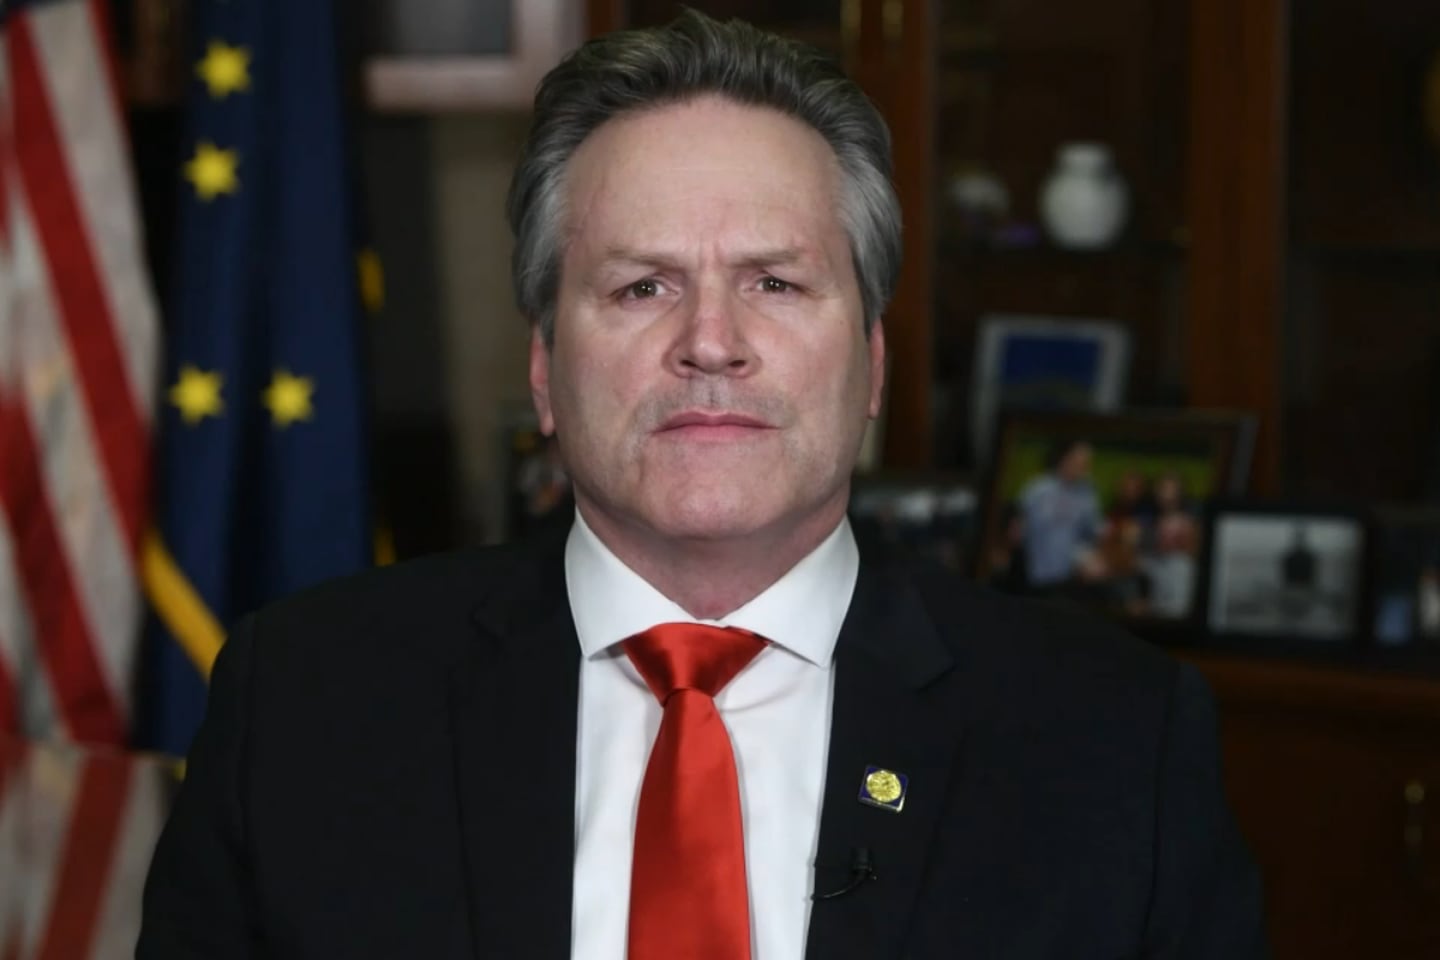 Gov. Mike Dunleavy State of the State speech